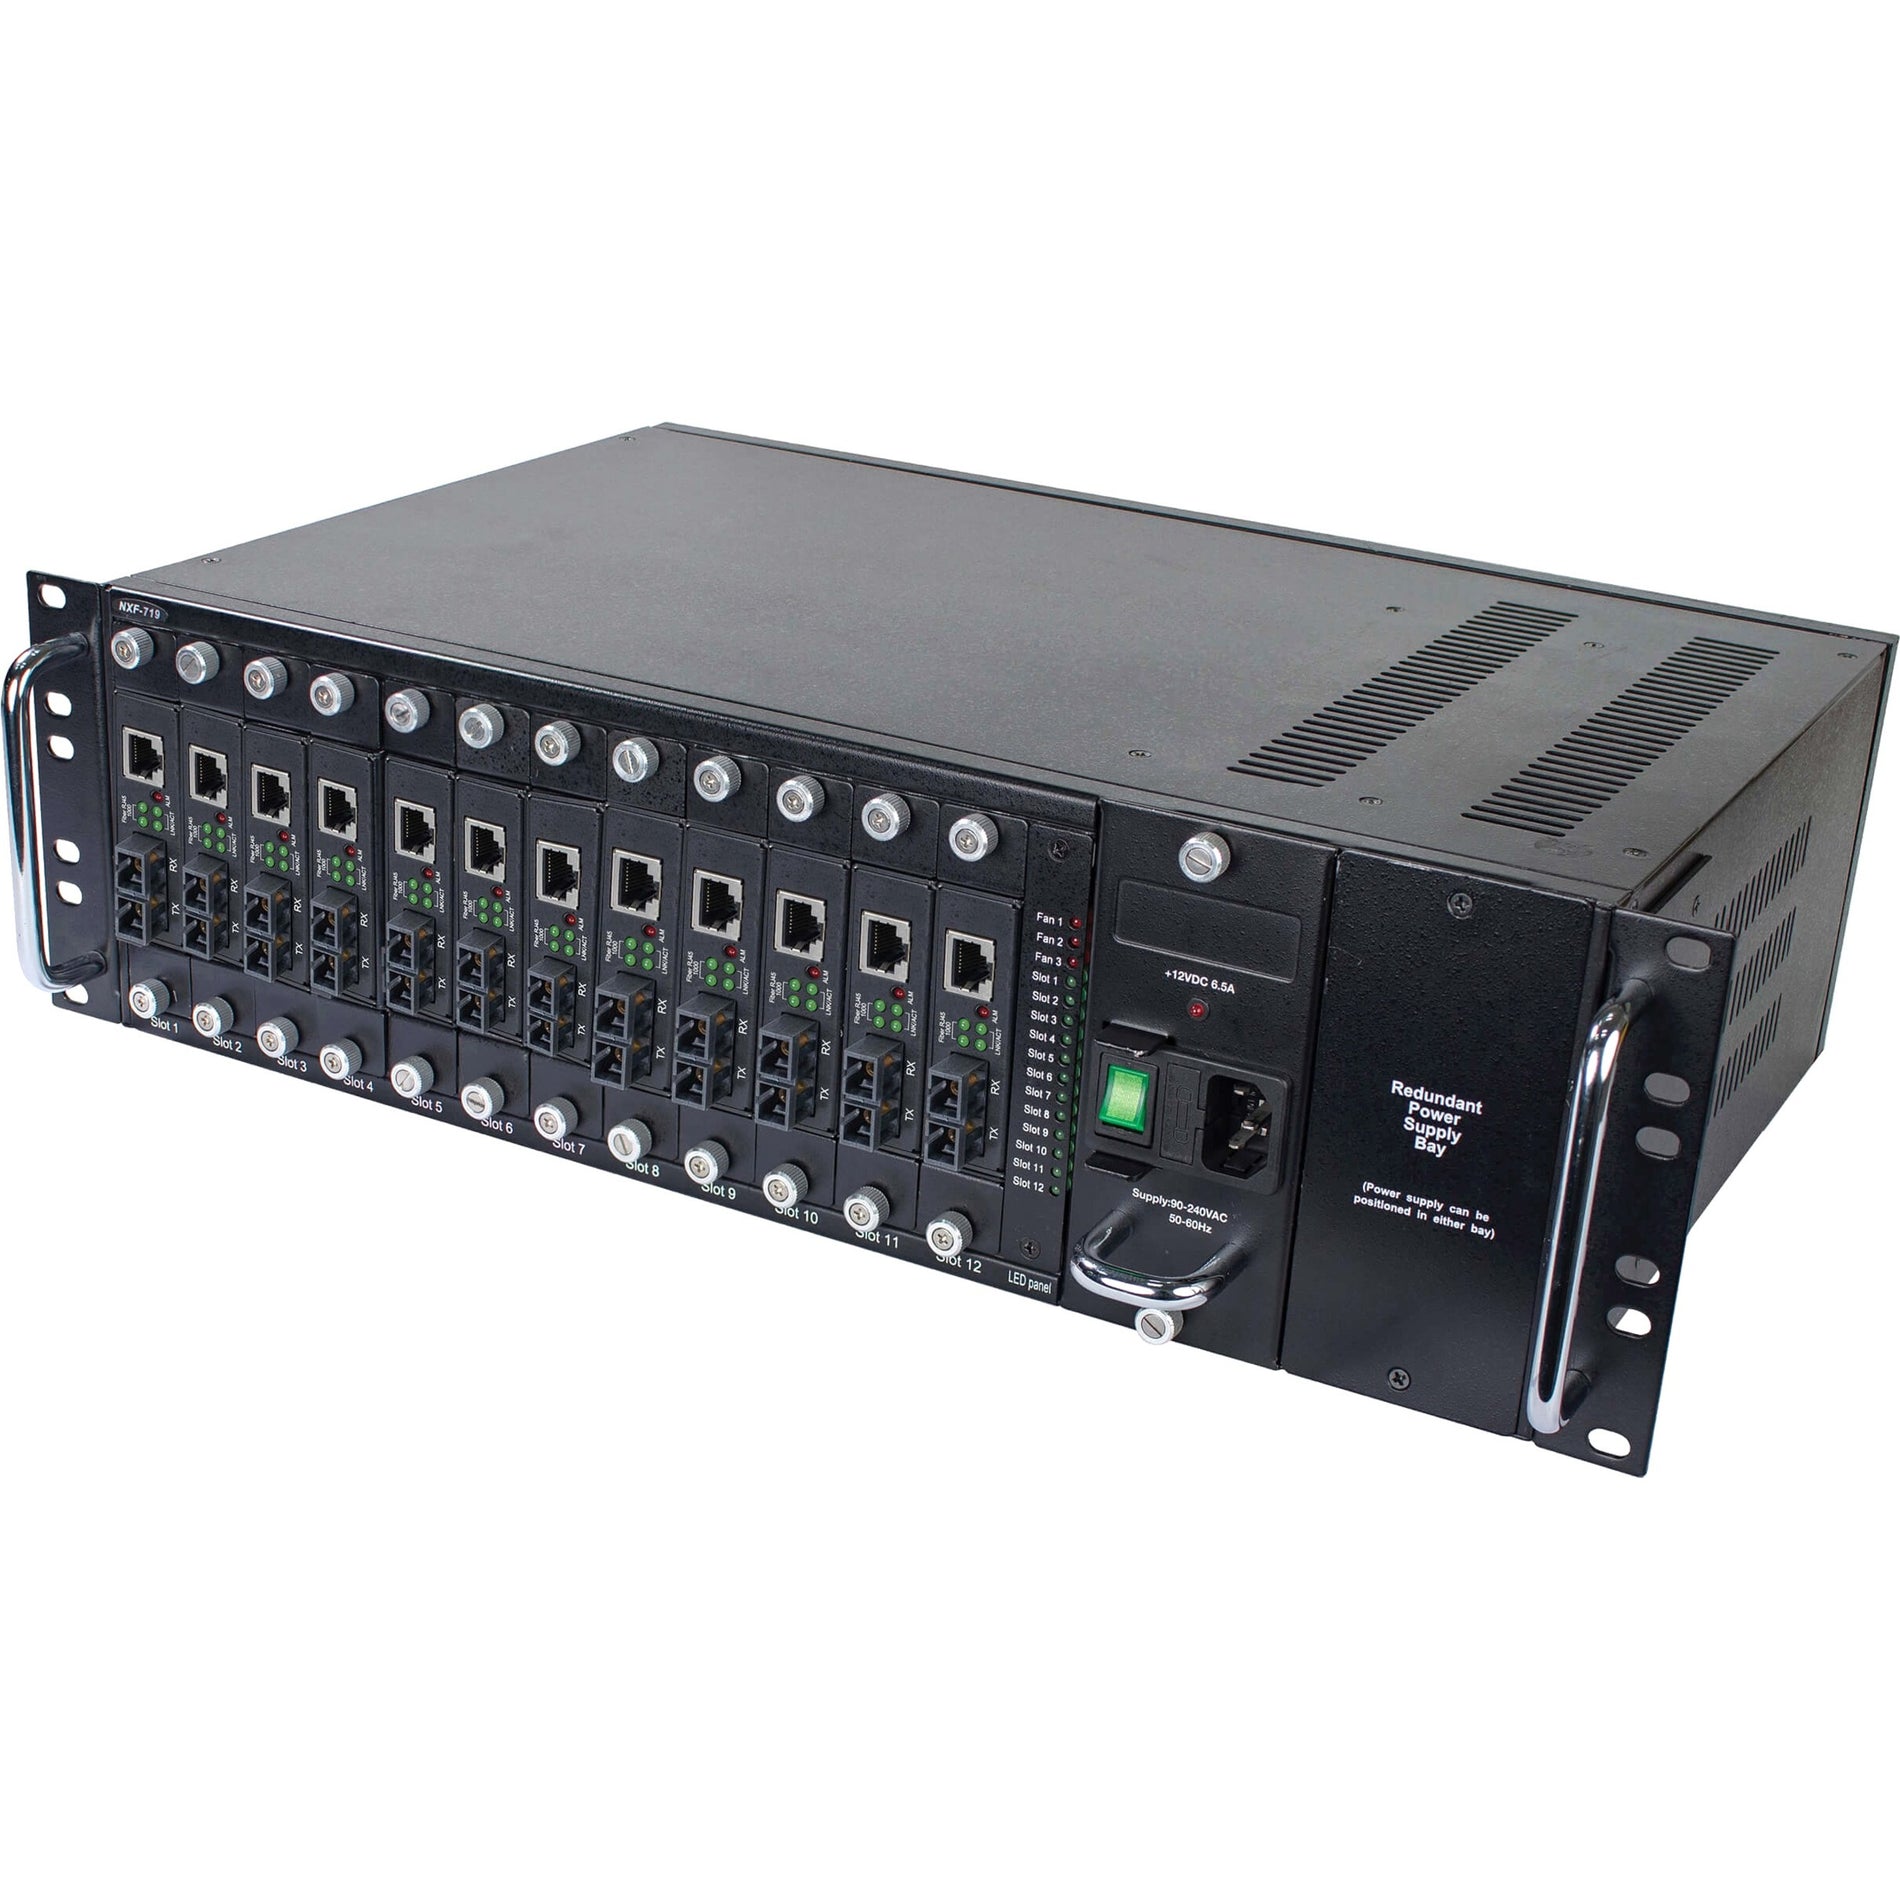 Tripp Lite N785-CH12 Media Converter Chassis, 12 Expansion Slots, Power Supply Included